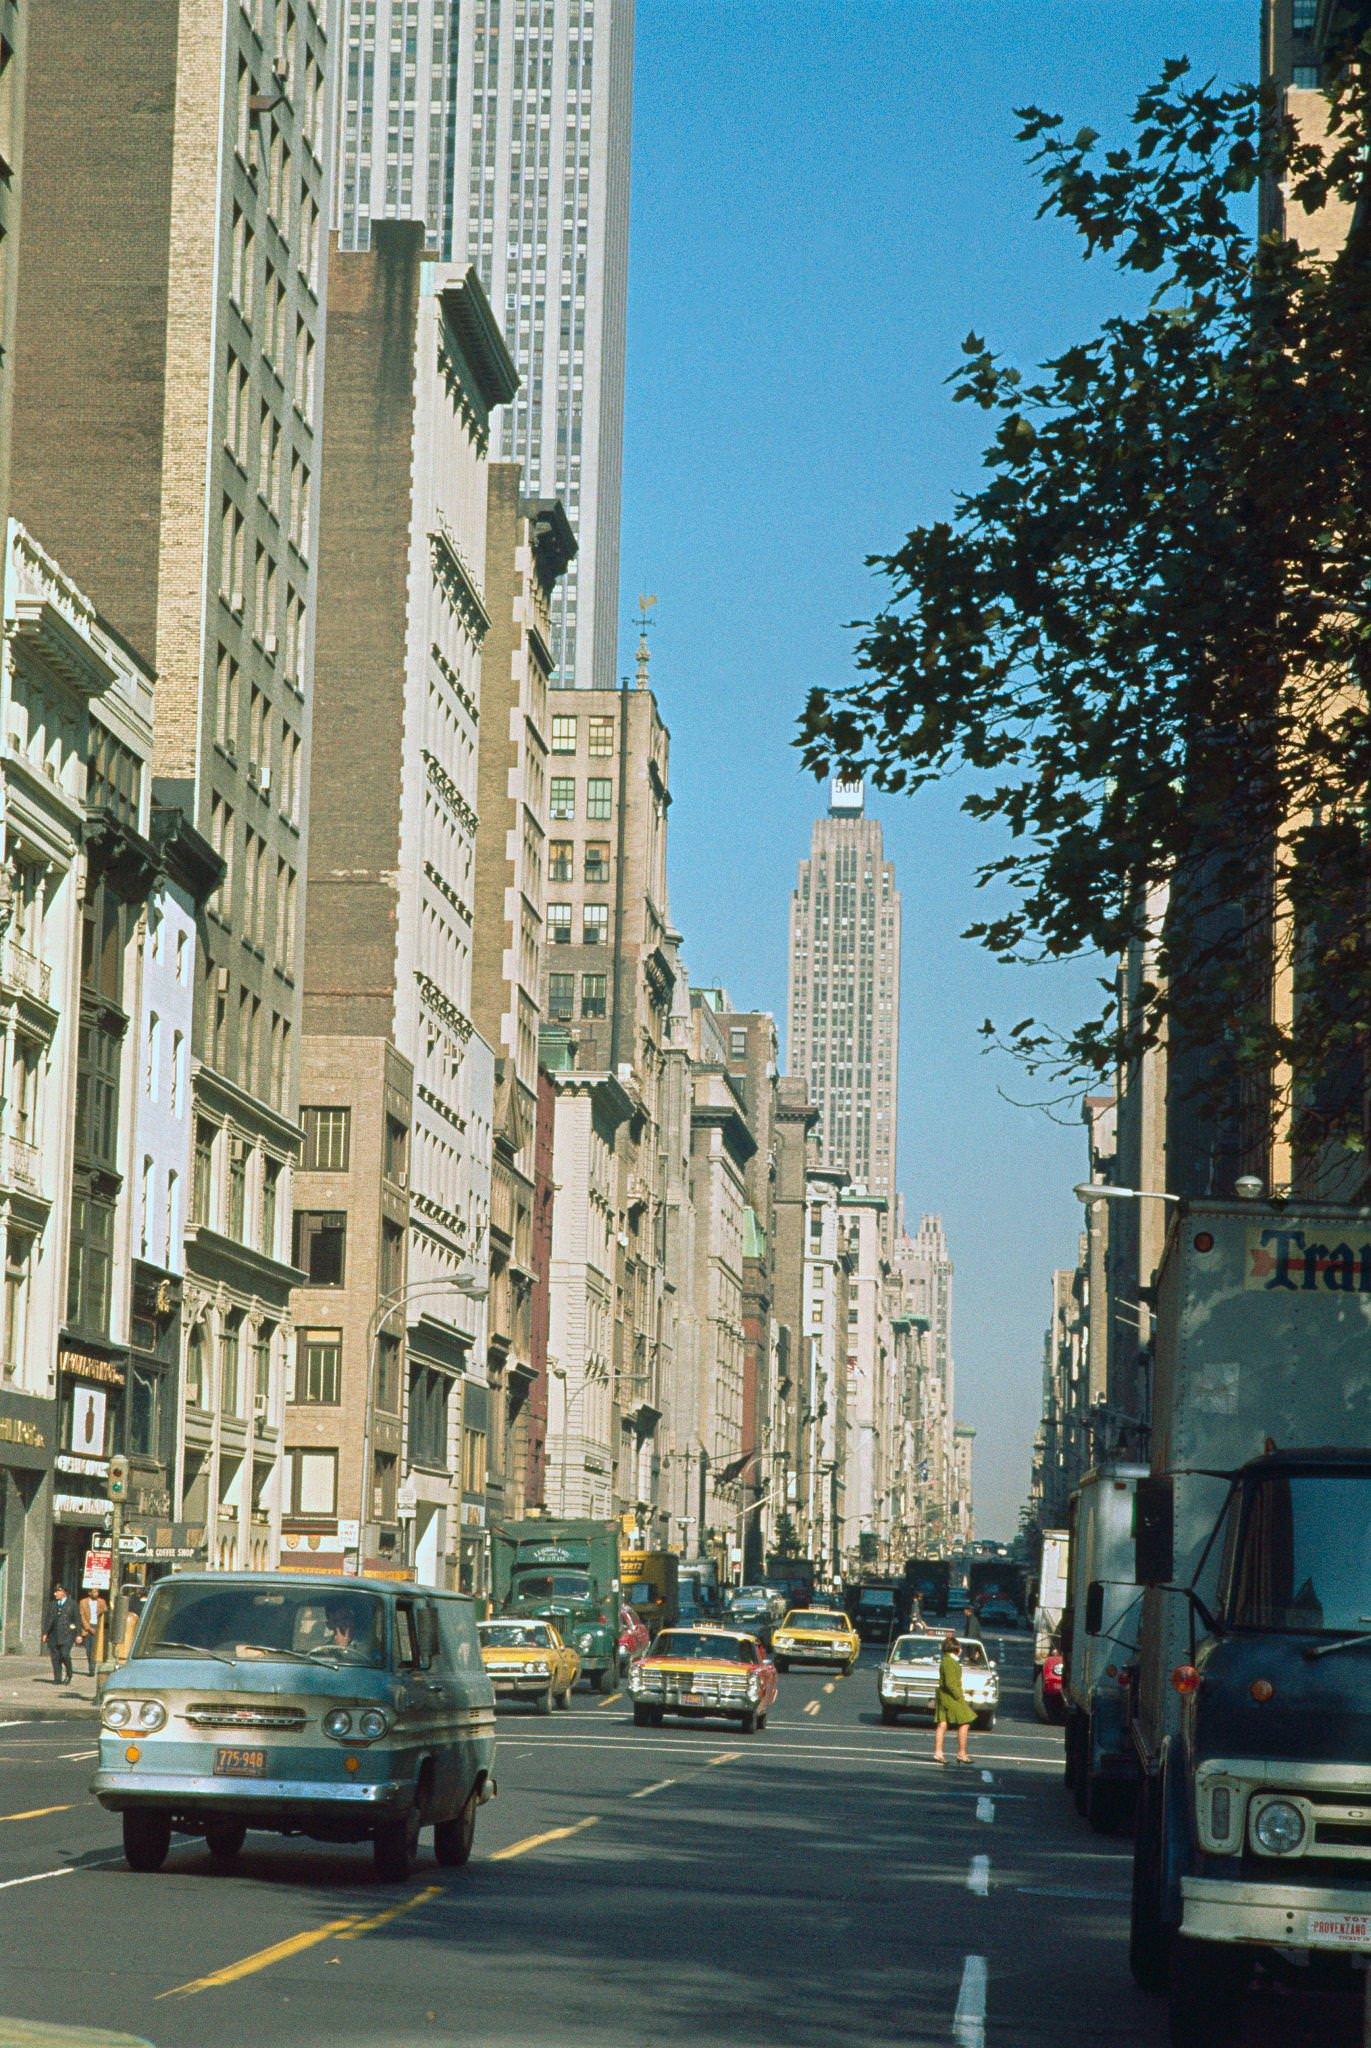 Traffic And Empire State Building, Manhattan, 1968